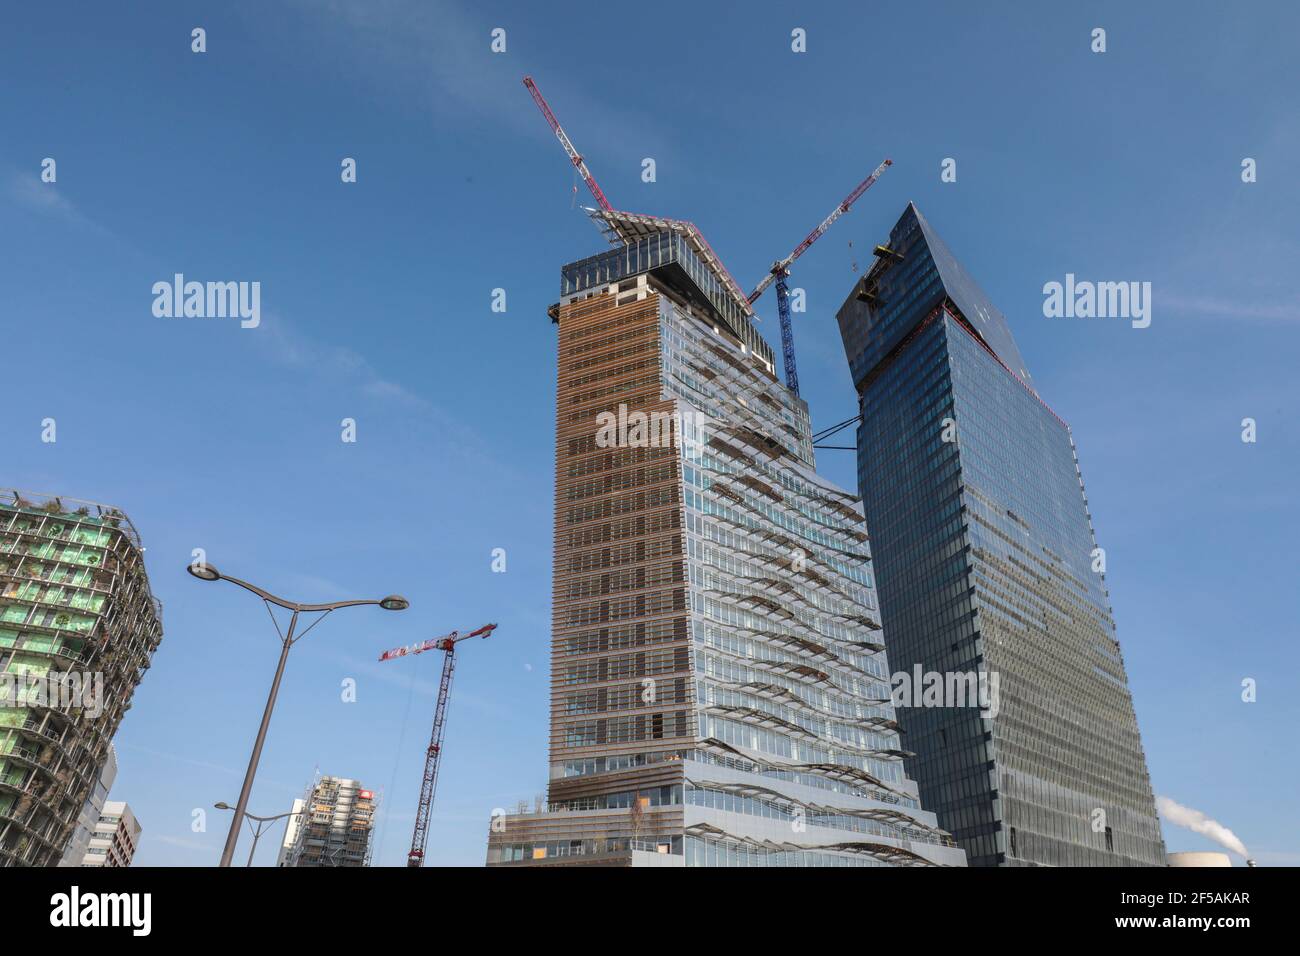 DUO TOWERS BY JEAN NOUVEL Stock Photo